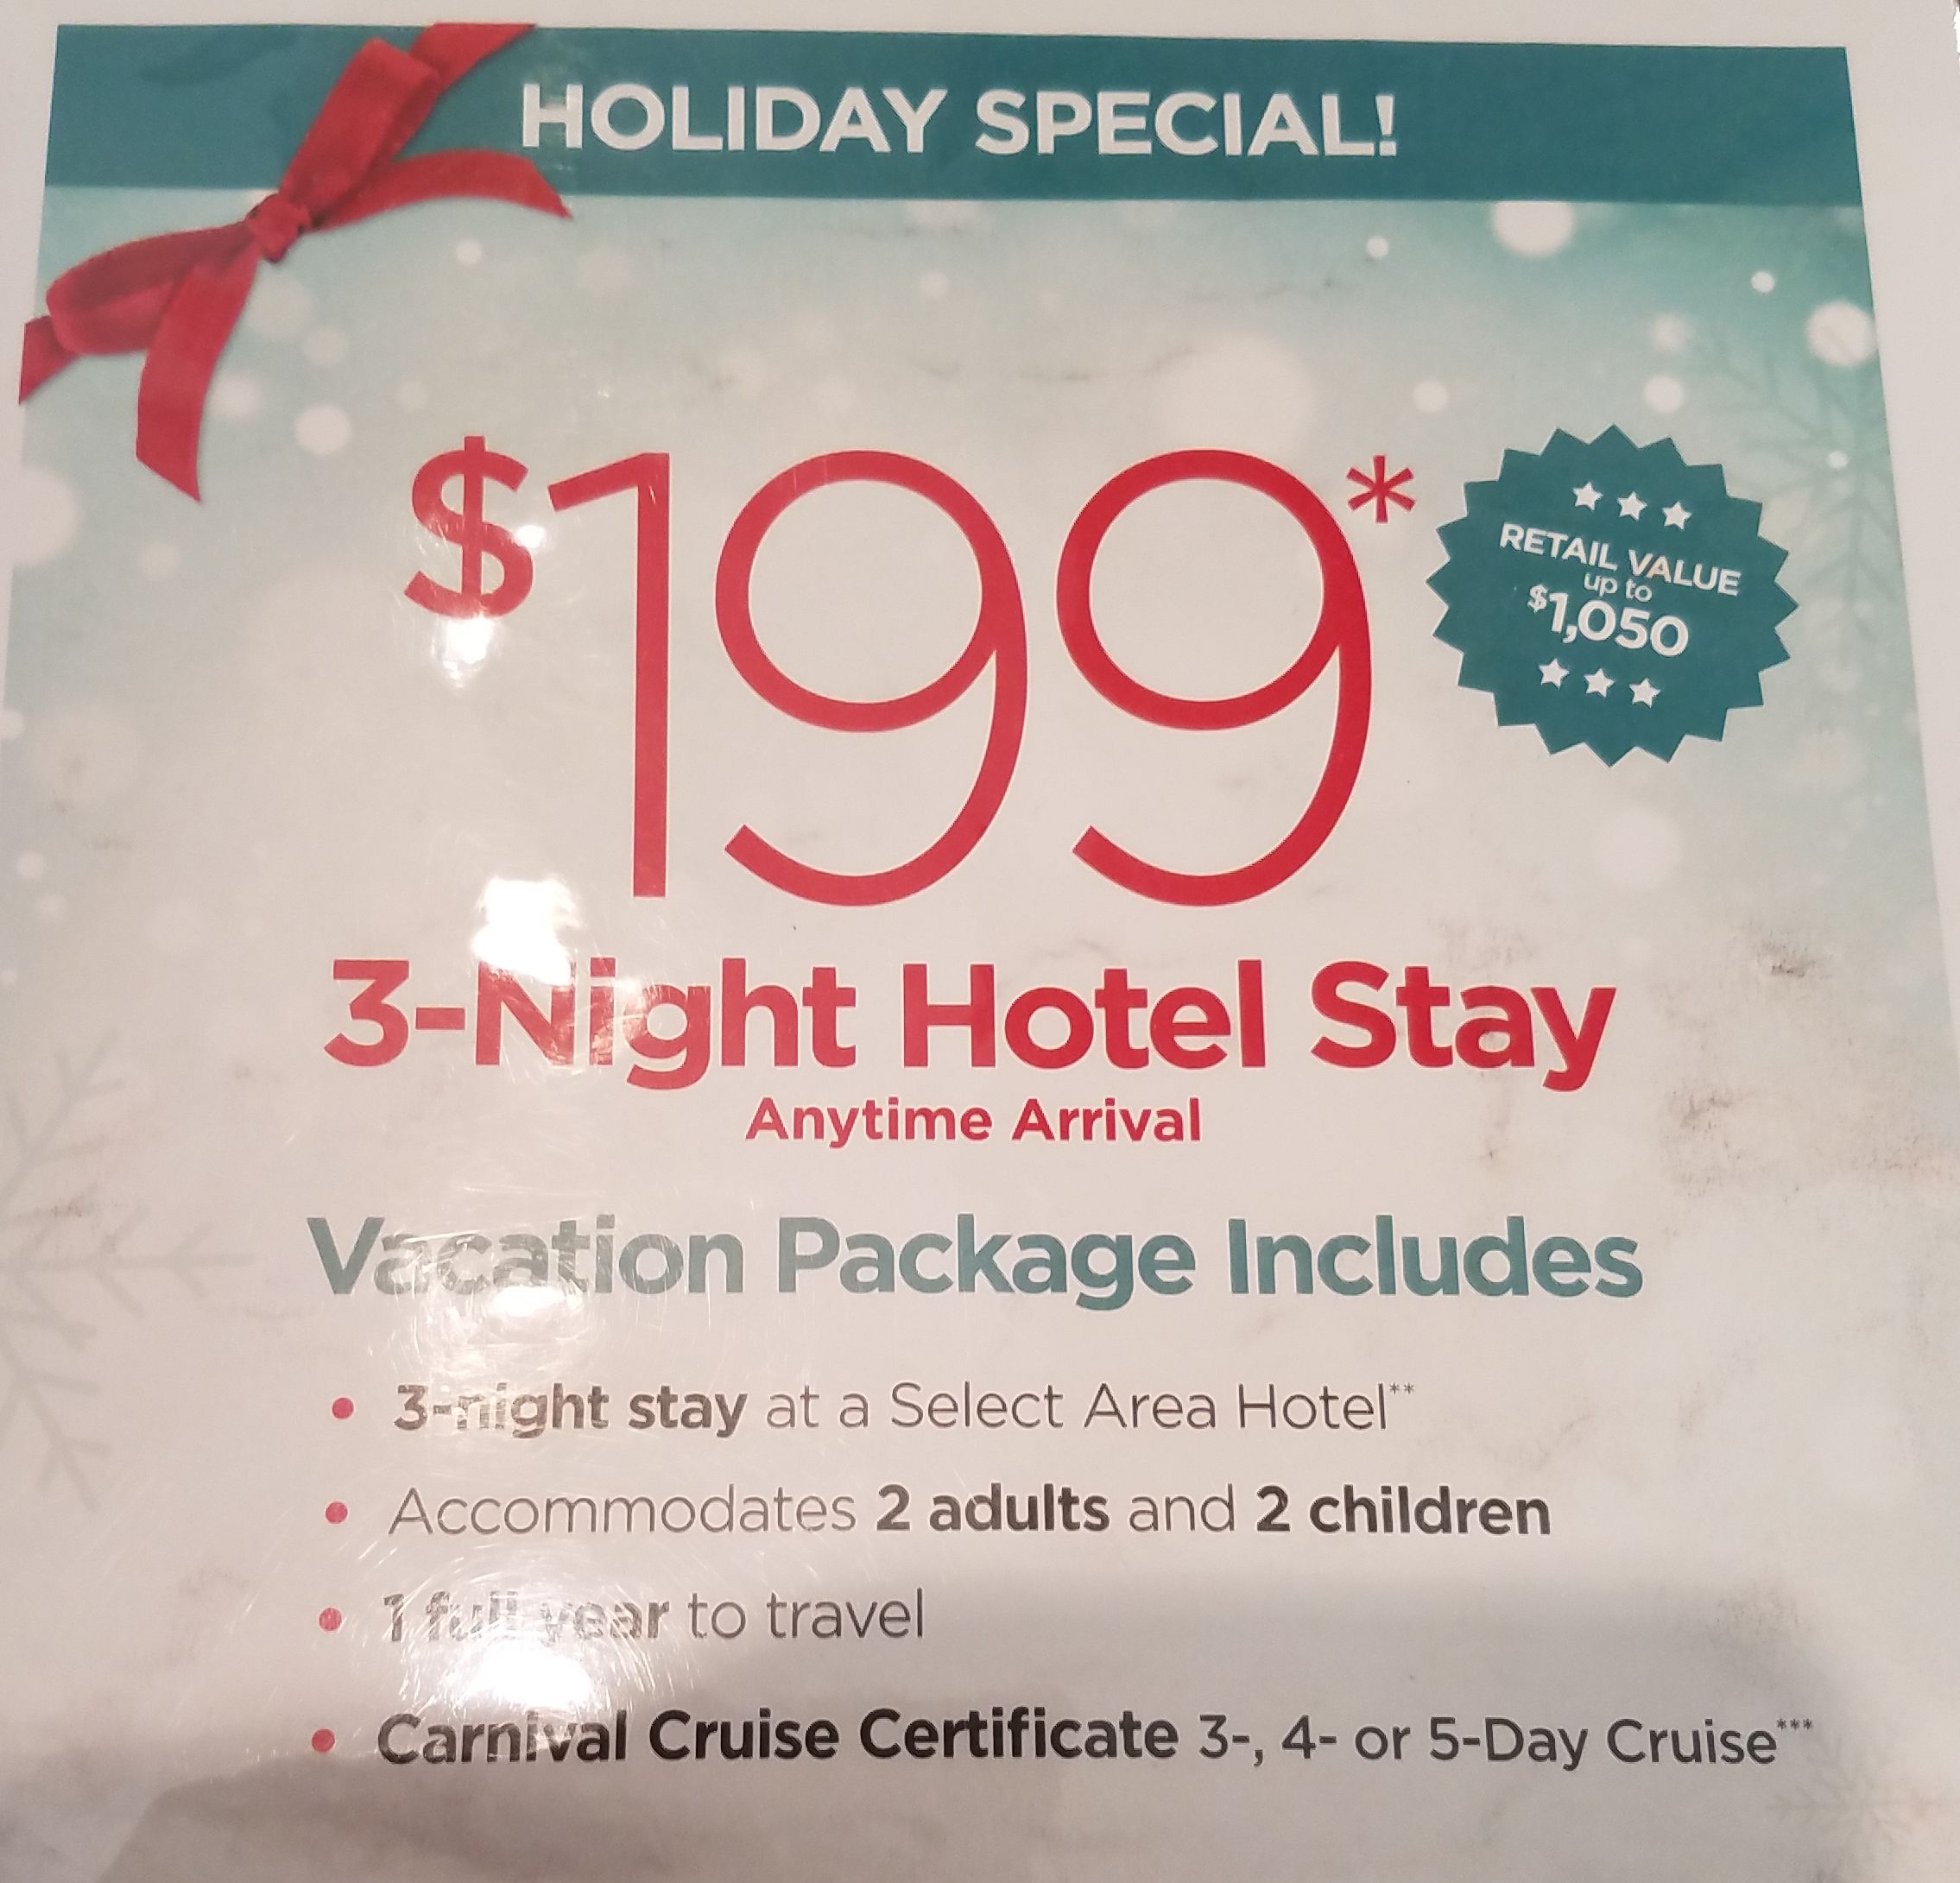 Vacation package